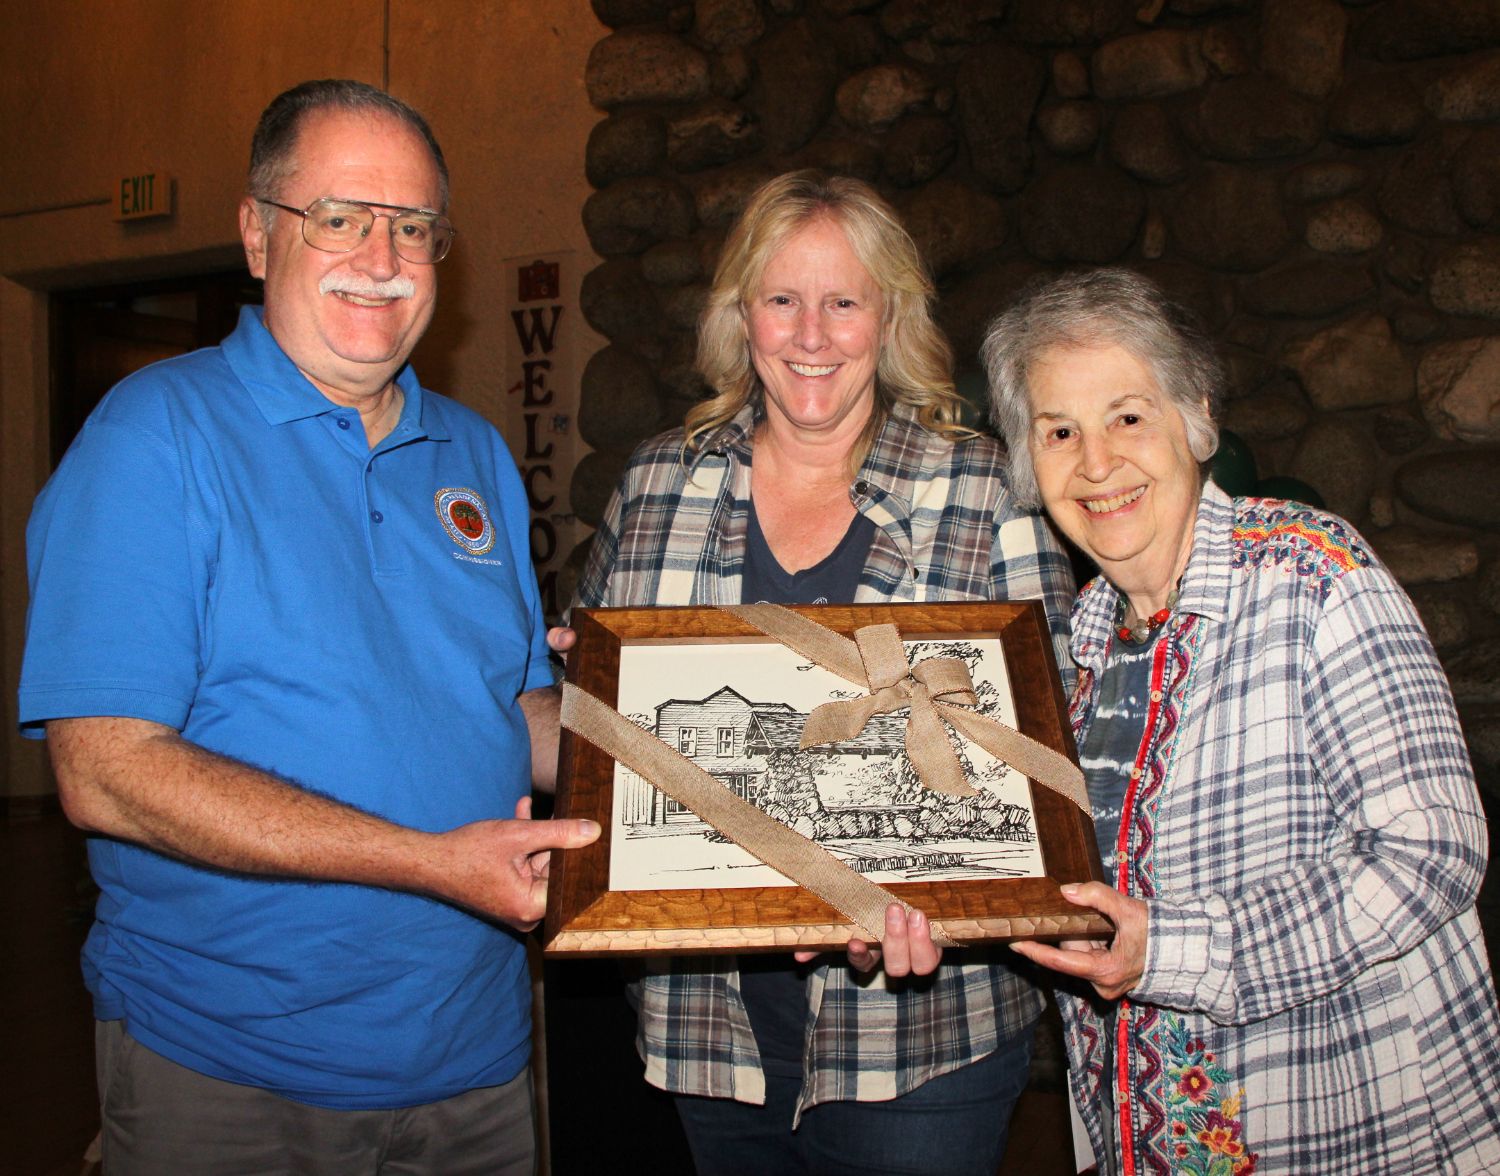 PHOTO: Henk Friezer | The South Pasadenan | South Pasadena Community Services Director, Sheila Pautsch, at her retirement party.